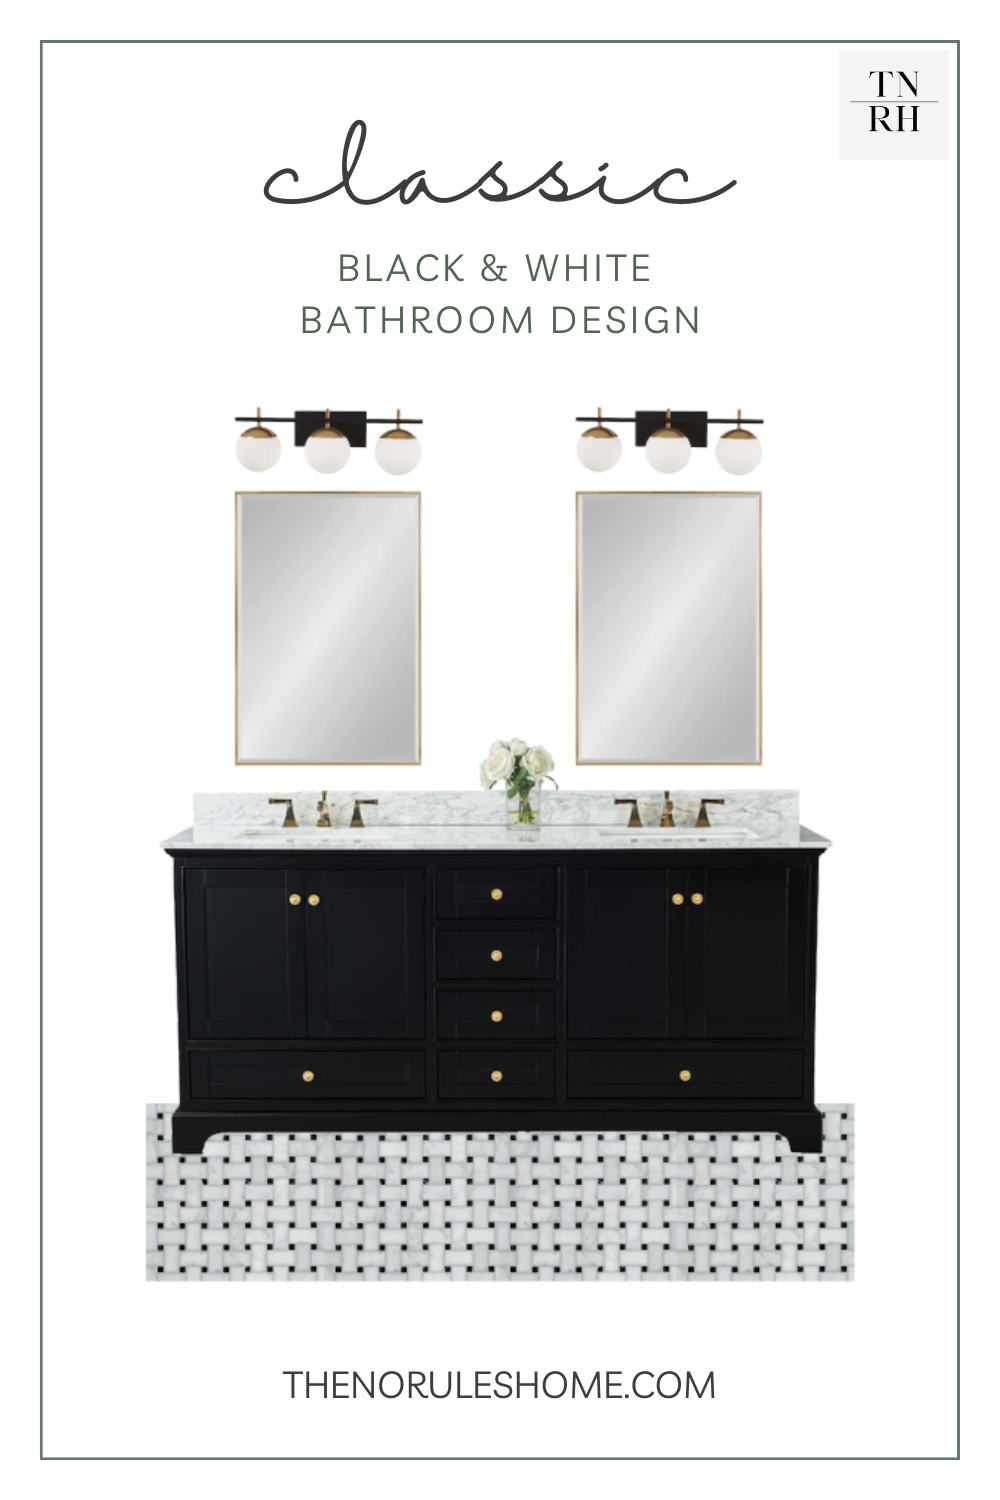 a black and white bathroom design with a black vanity, gold mirrors, modern lights and black and white basket weave floor tile